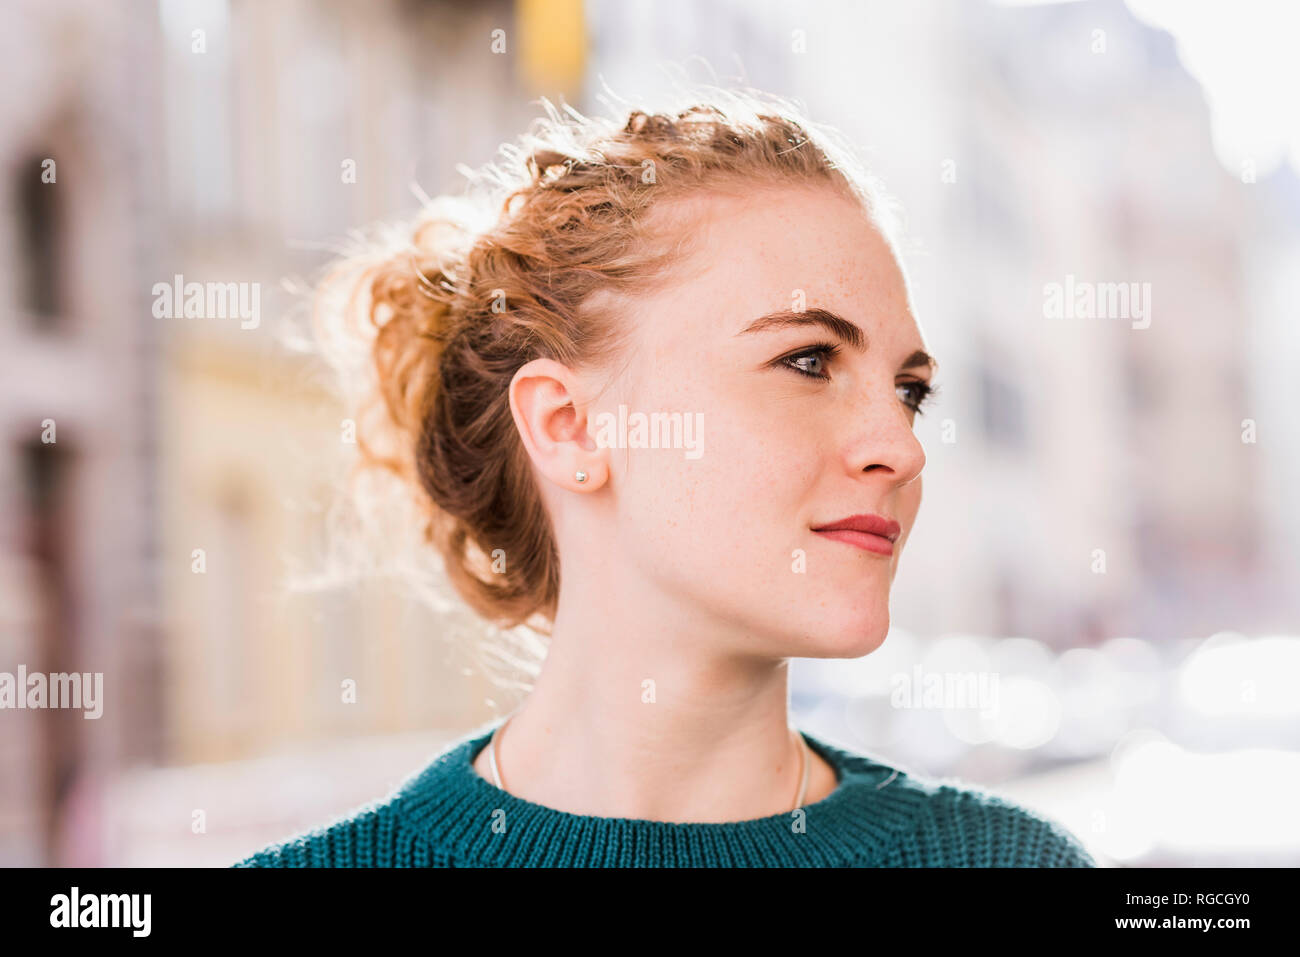 Portrait of strawberry blonde young woman Stock Photo